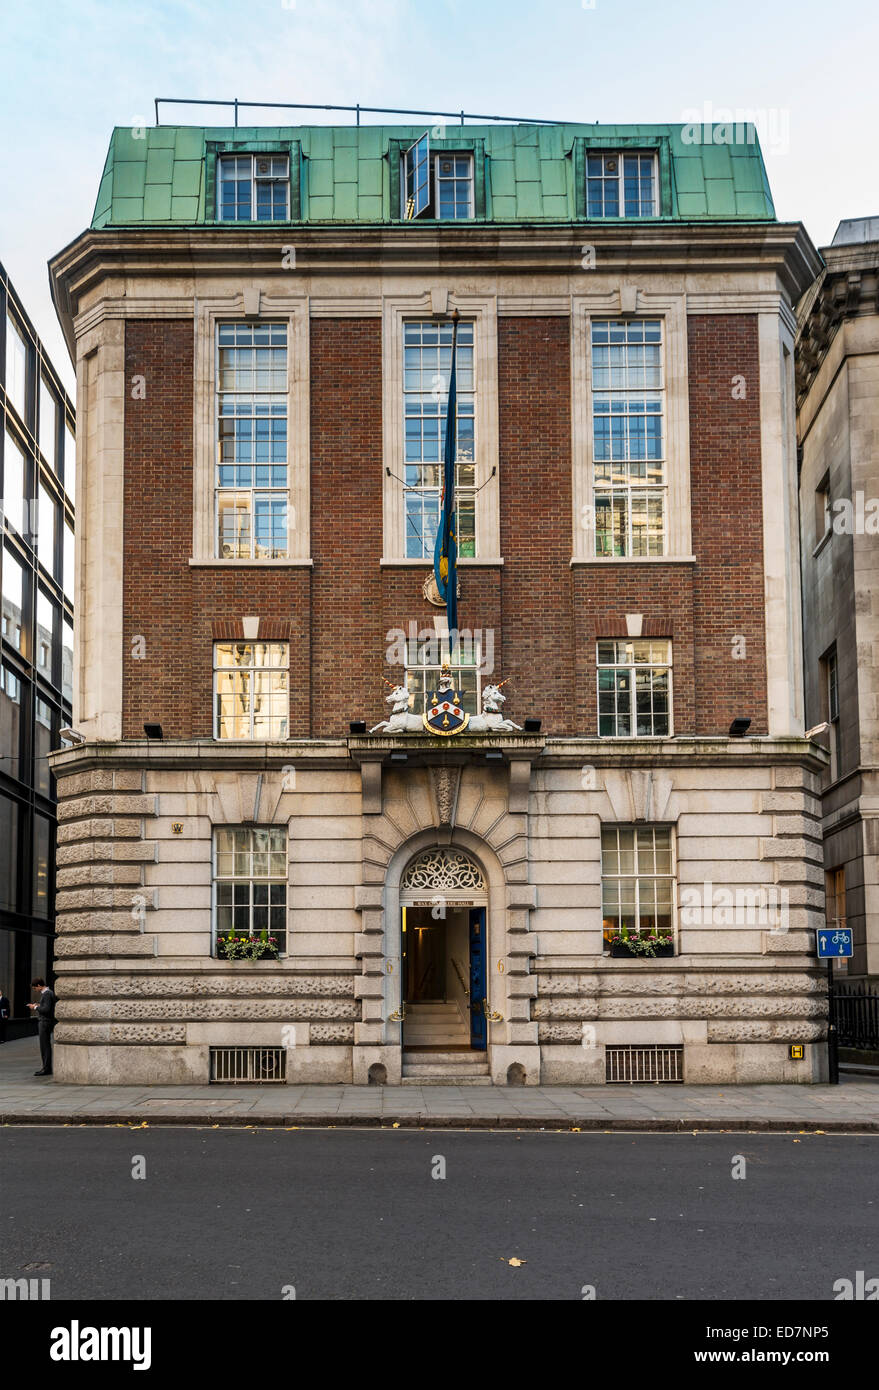 The Wax Chandlers' Hall is the home of a City of London livery company based around beeswax, located on Gresham Street. Stock Photo